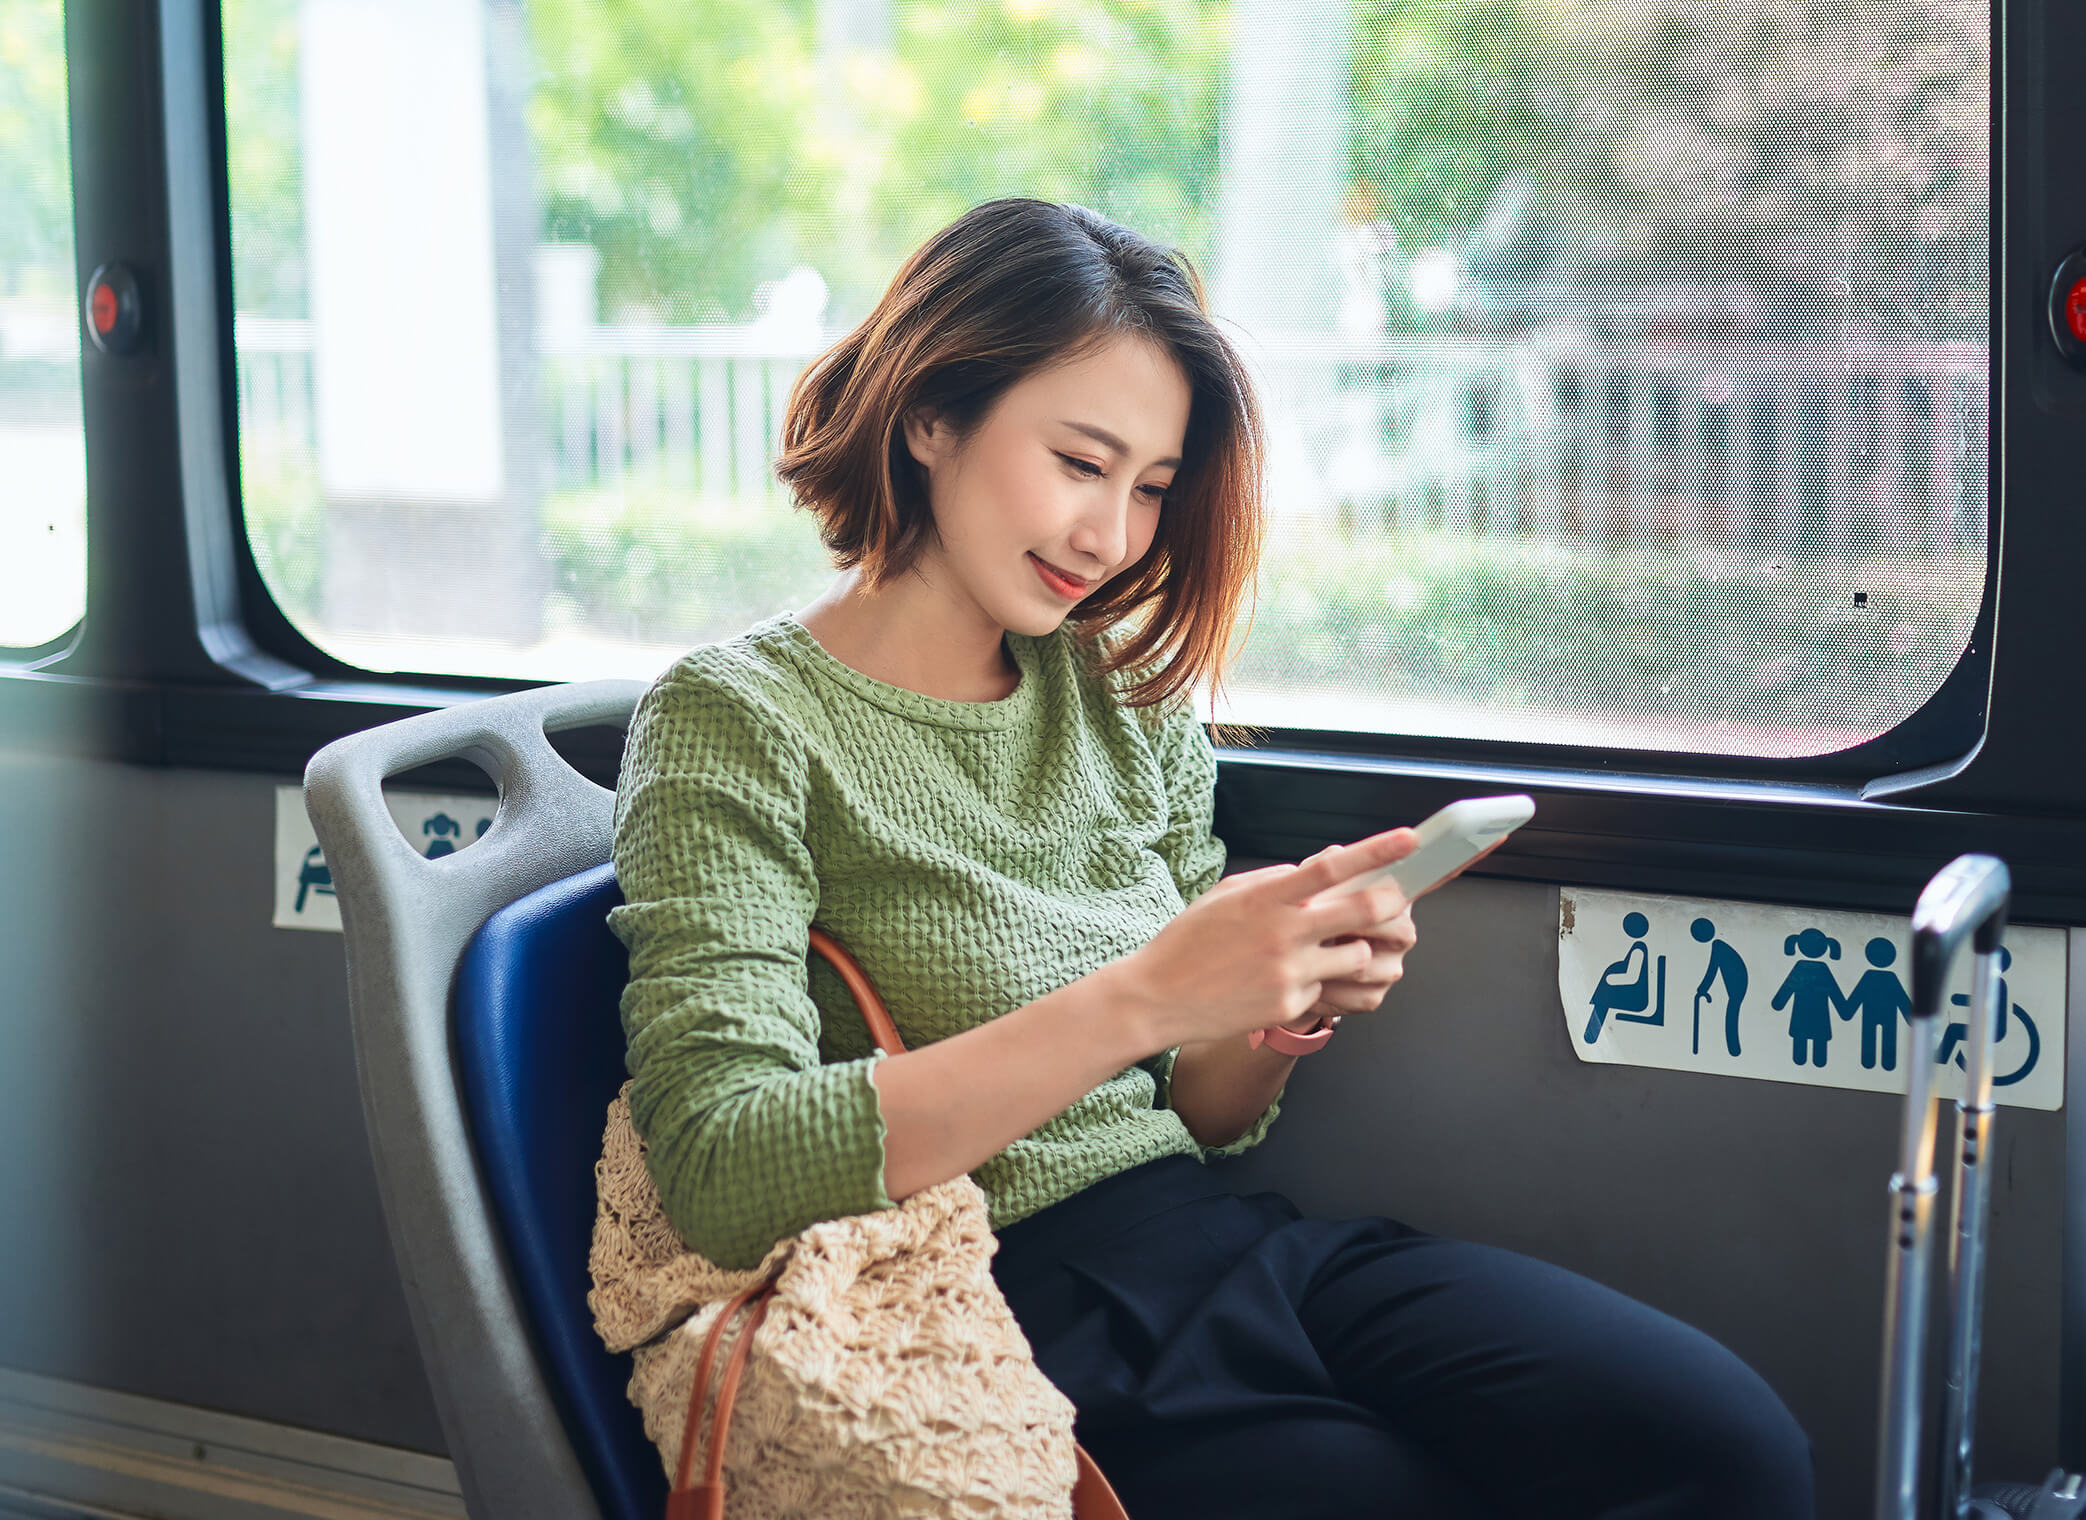 A smiling woman uses her phone while sitting in a bus